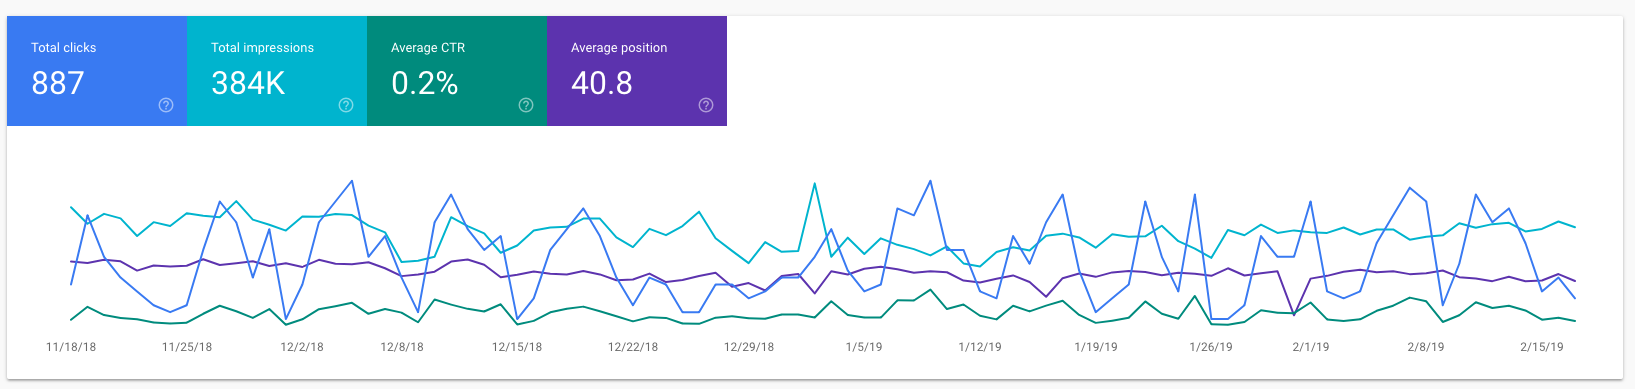 Clicks & Impressions Report from Search Console